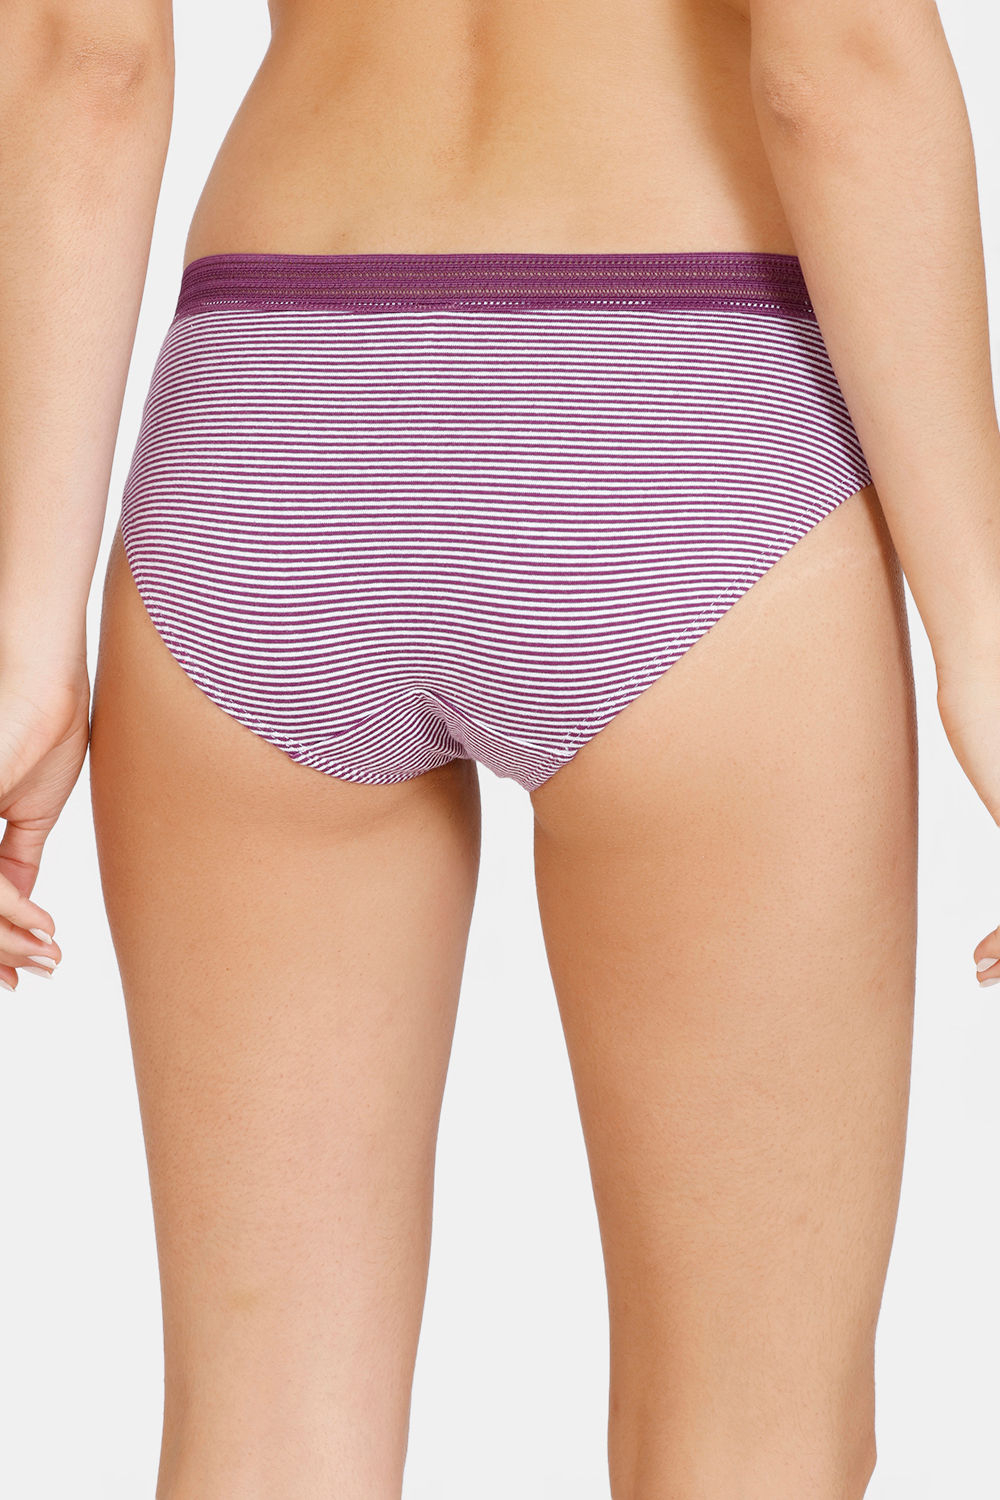 Zivame Wonder Stripe Double Layered Non-Wired Full Coverage Cami Bra with  Low Rise Panty - Purple Passion